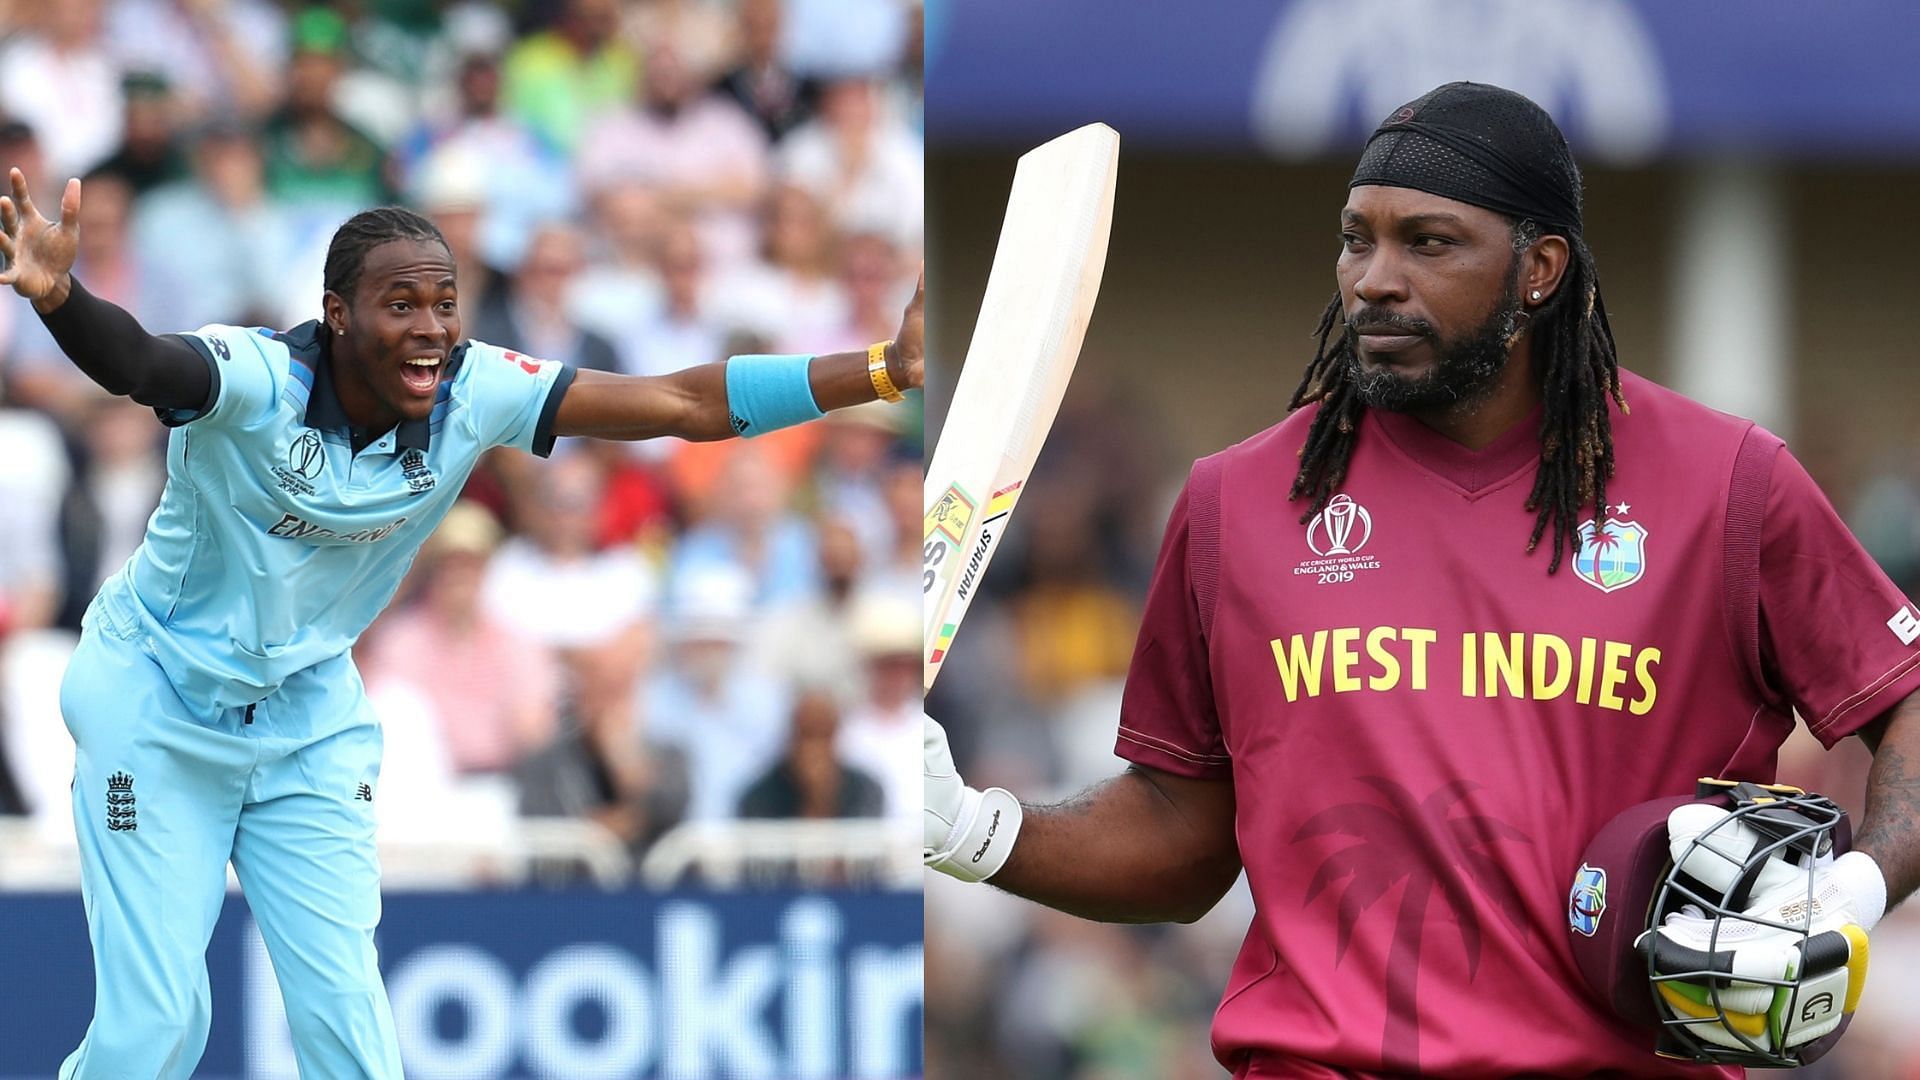 England’s Jofra Archer and West Indies’ Chris Gayle.